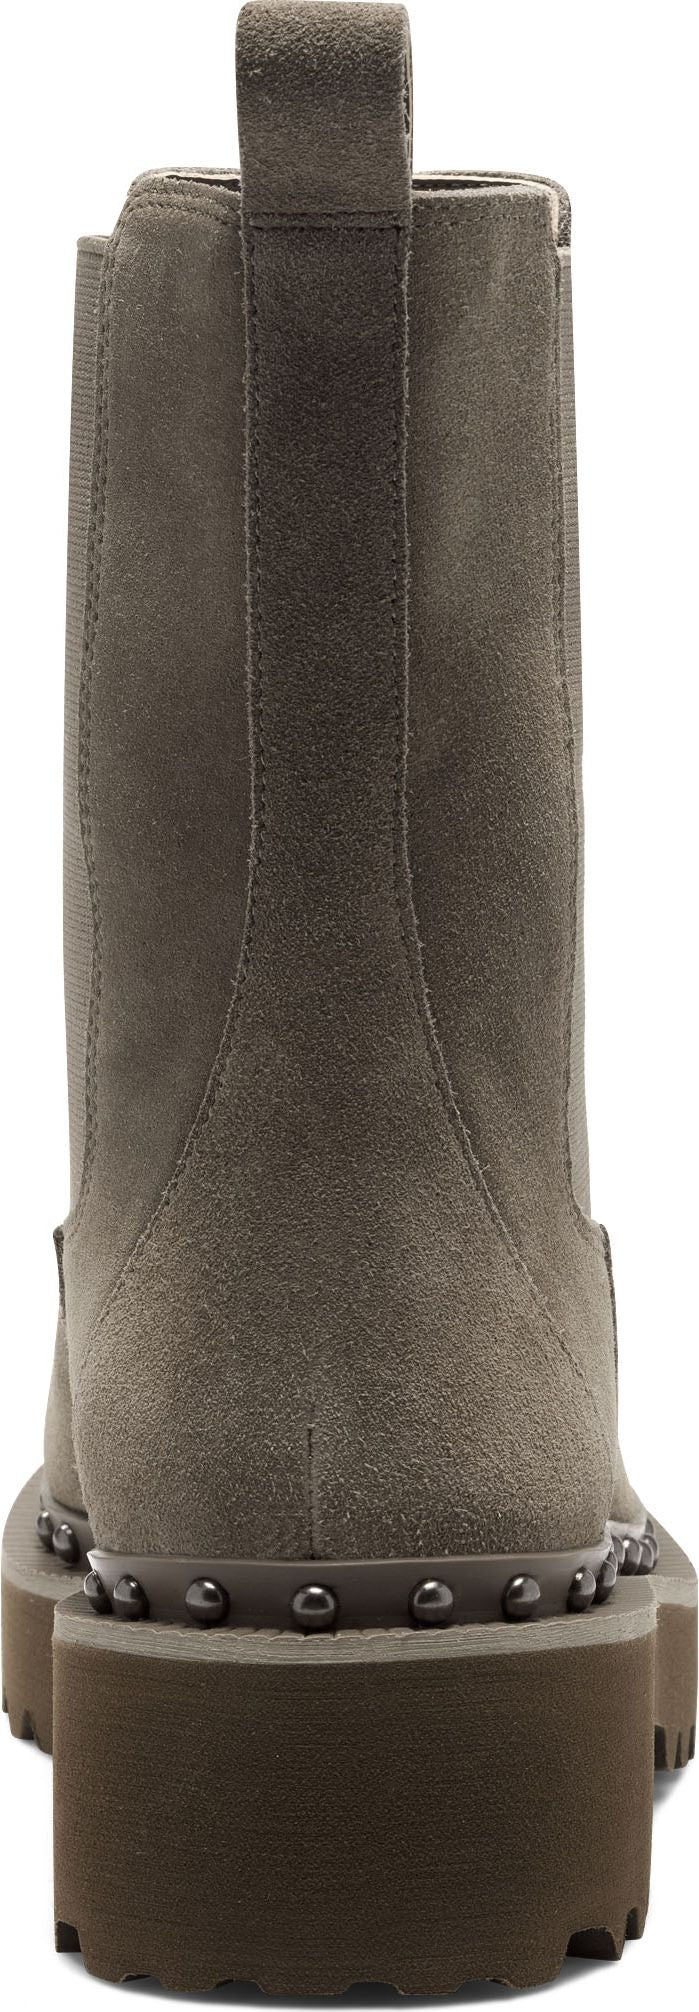 Vince Camuto Boots Meendey Tuscan Taupe